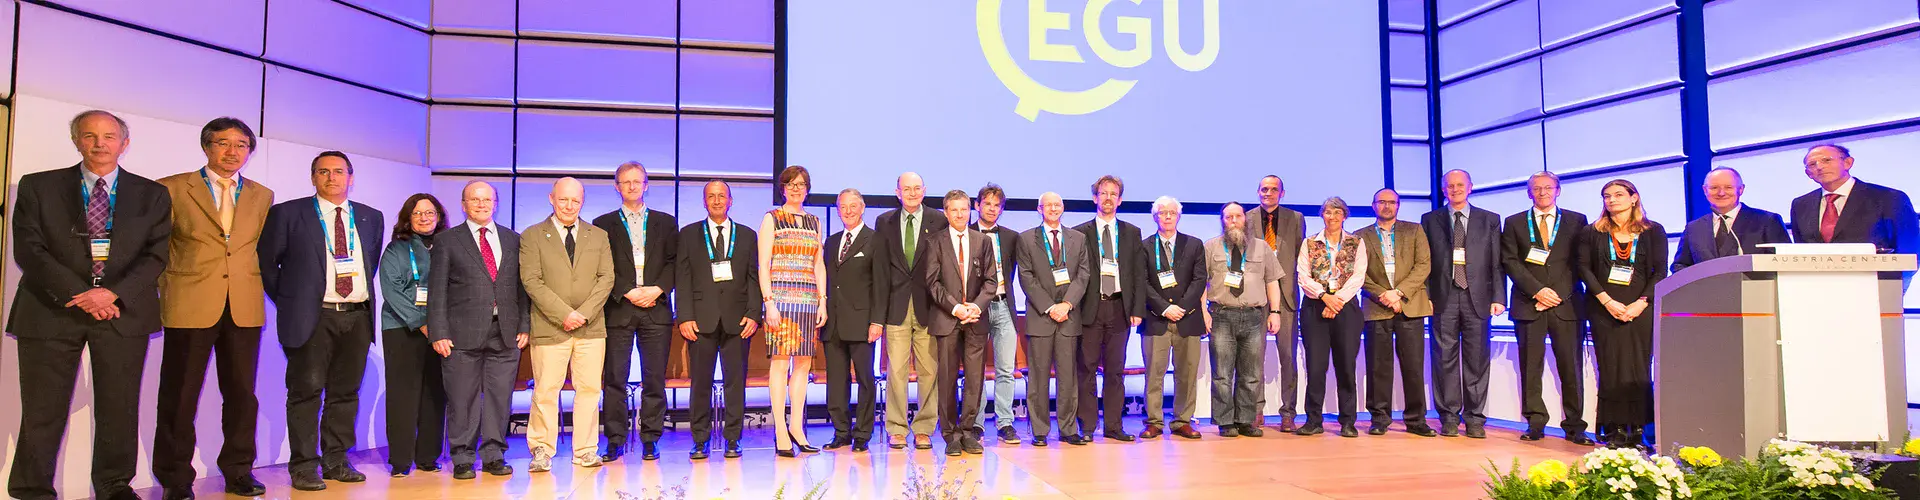 Some of last year's awardees with the EGU President and Vice-President at the EGU 2017 Awards Ceremony (Credit: EGU/Foto Pfluegl)